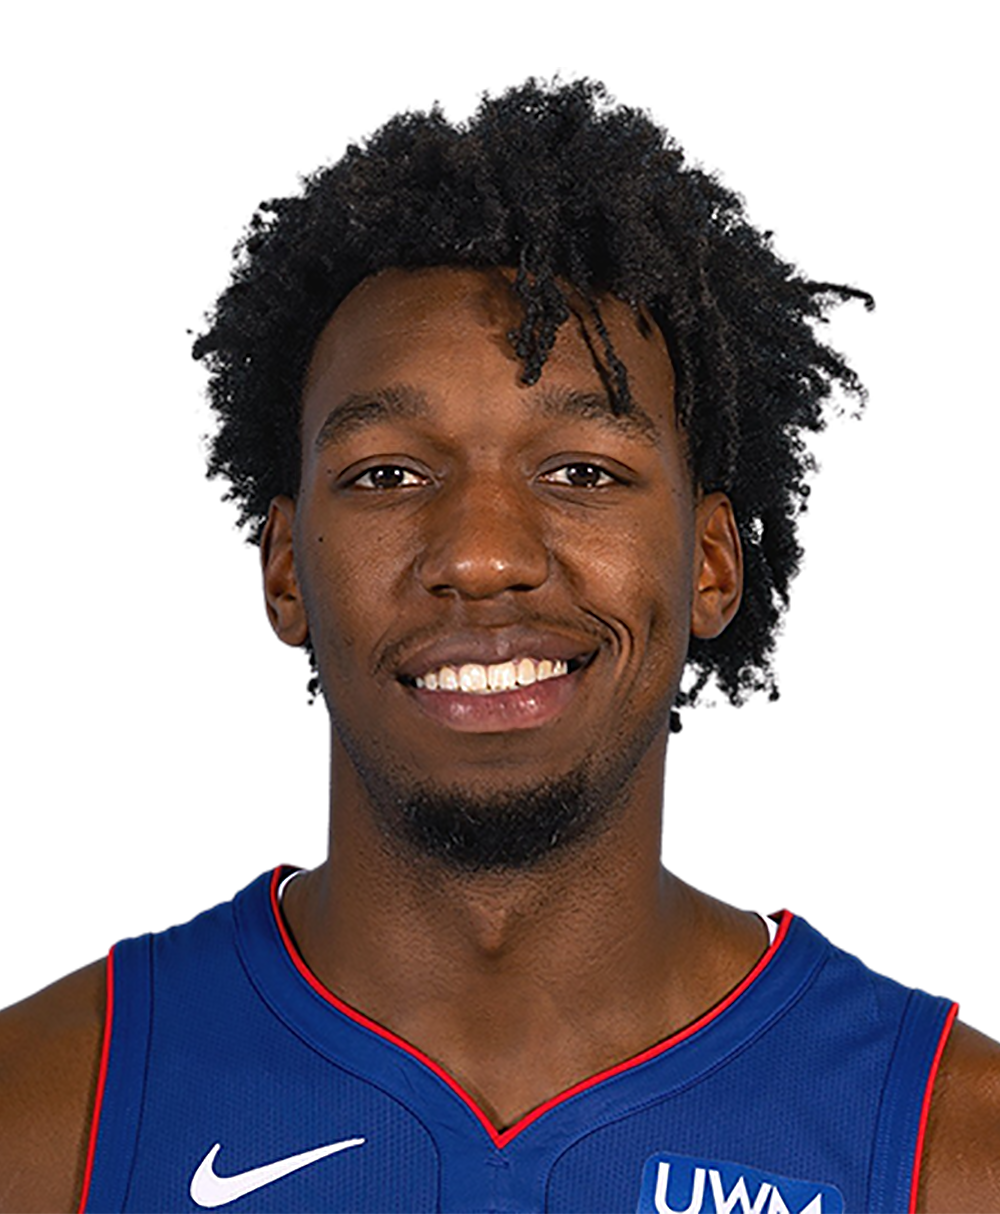 James Wiseman American professional basketball player for the